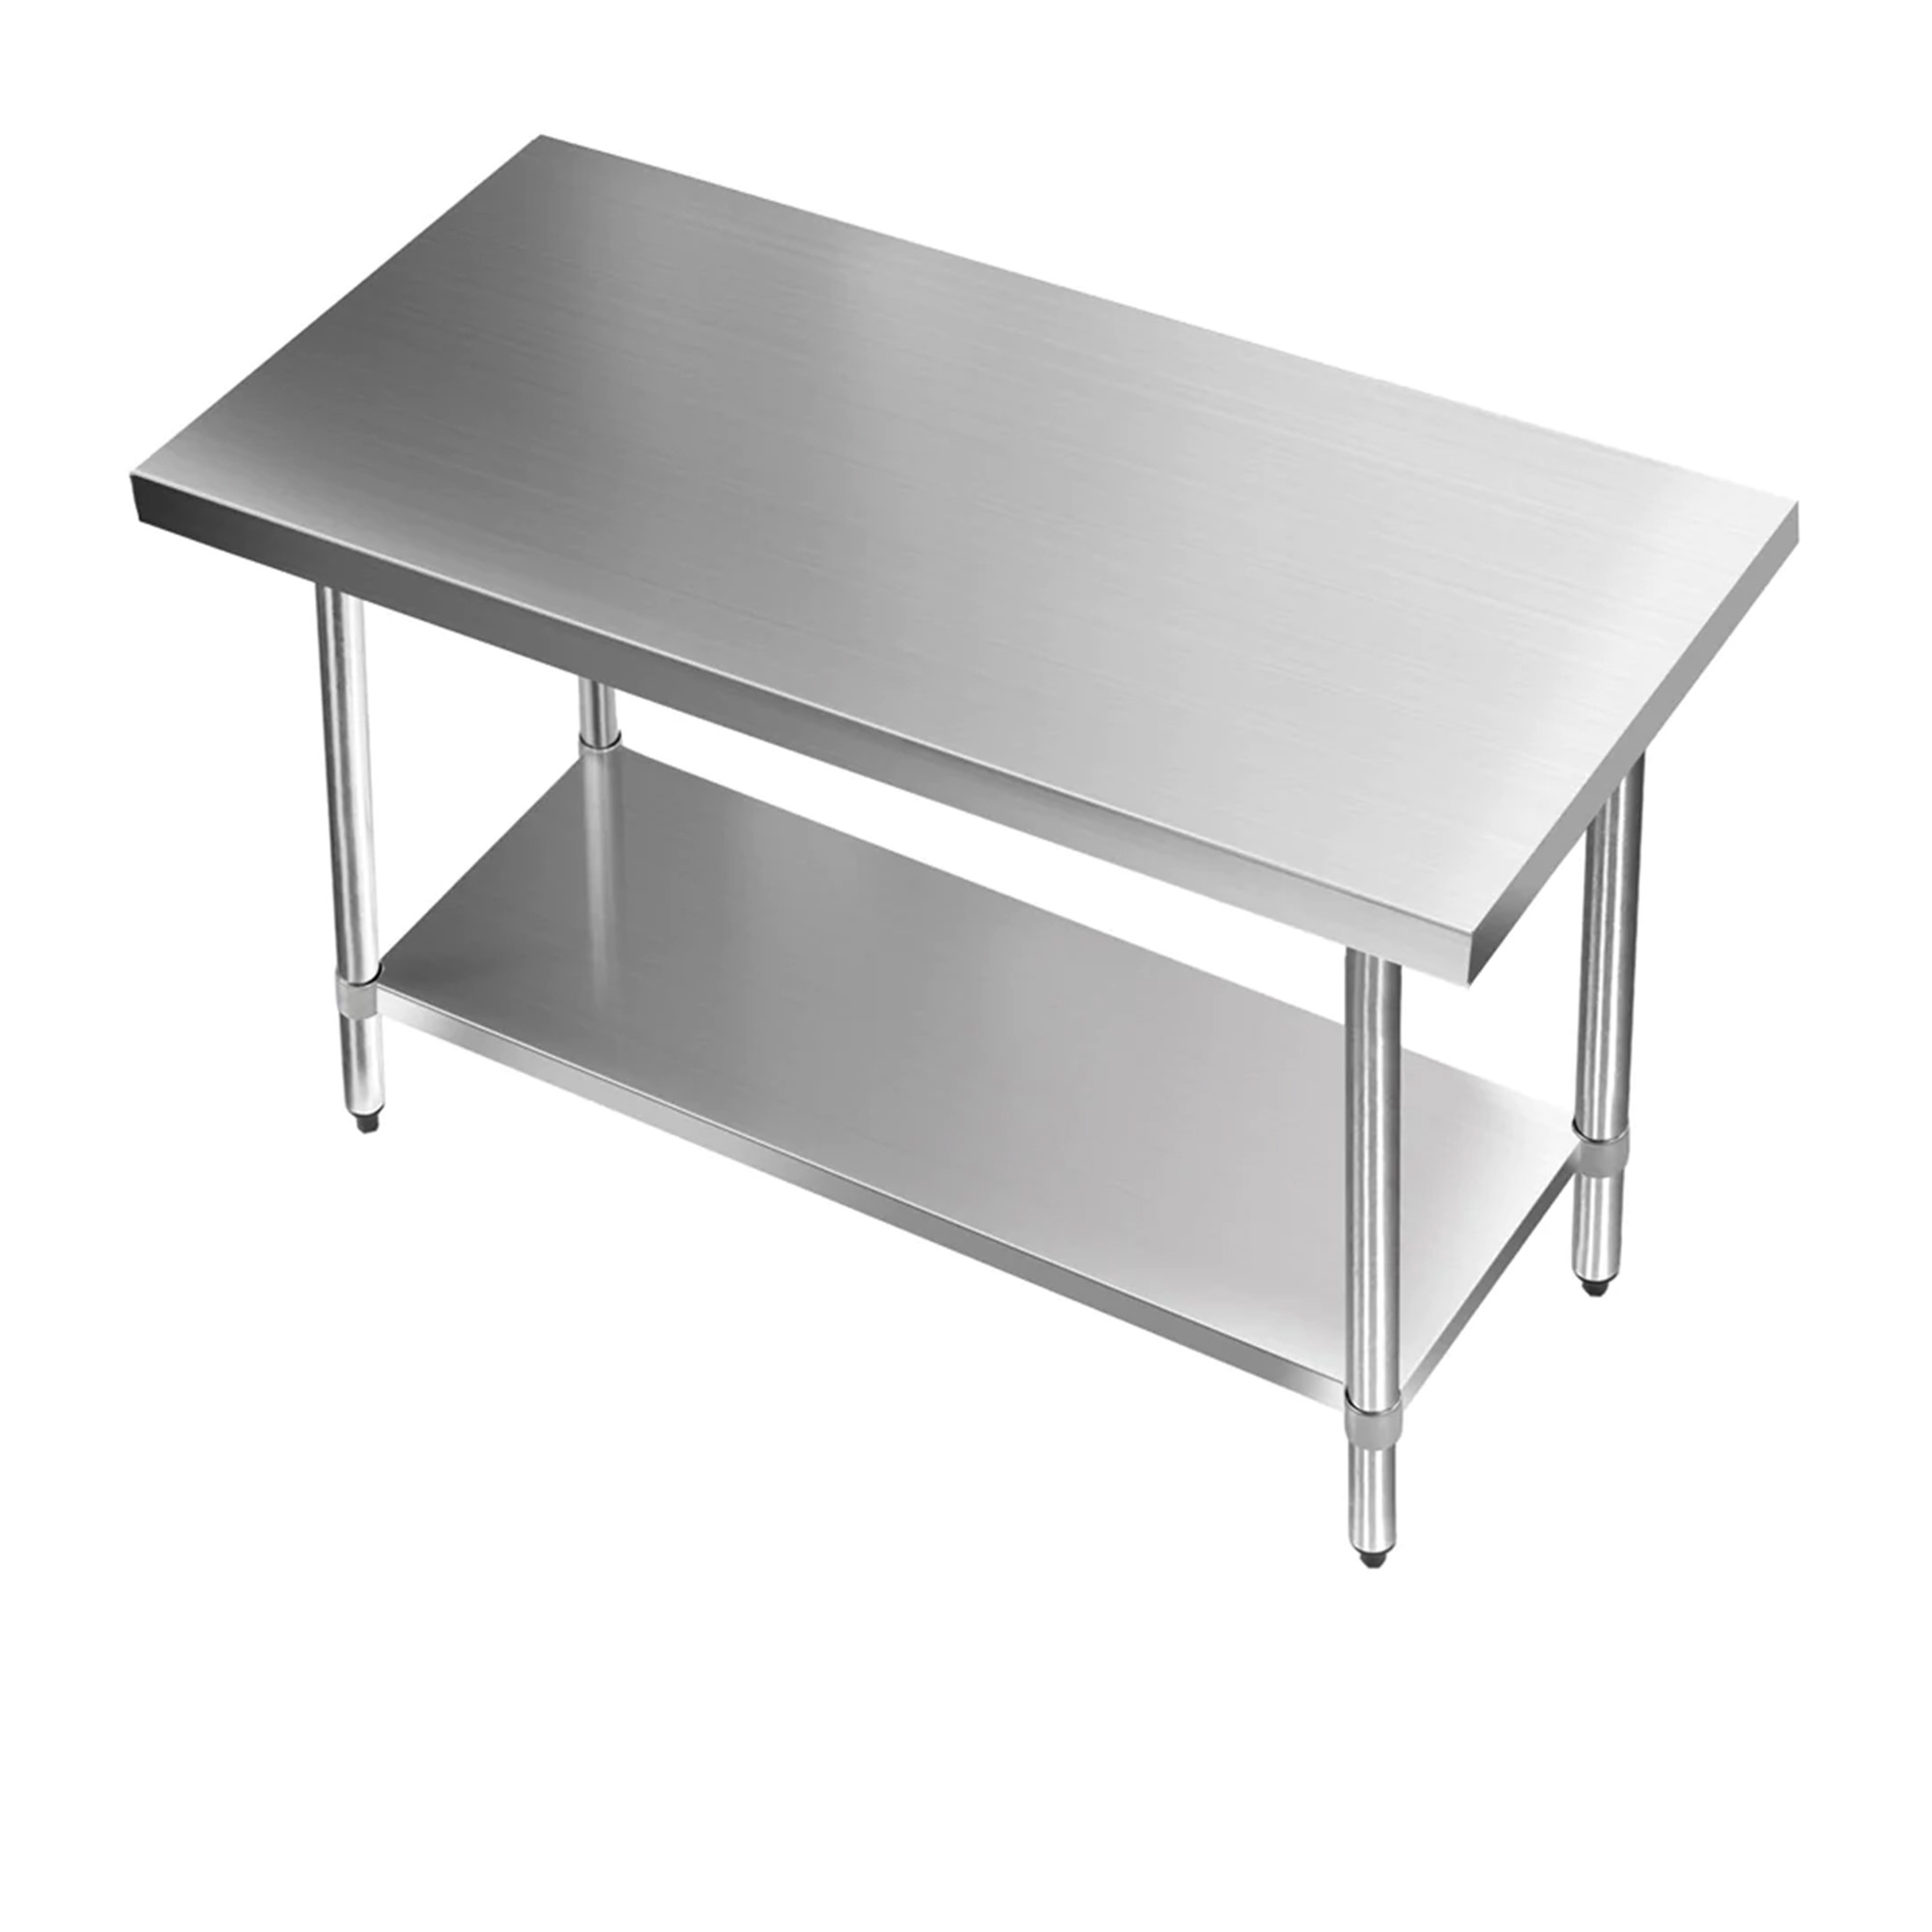 Cefito 430 Stainless Steel Kitchen Bench 121.9x61cm Image 2